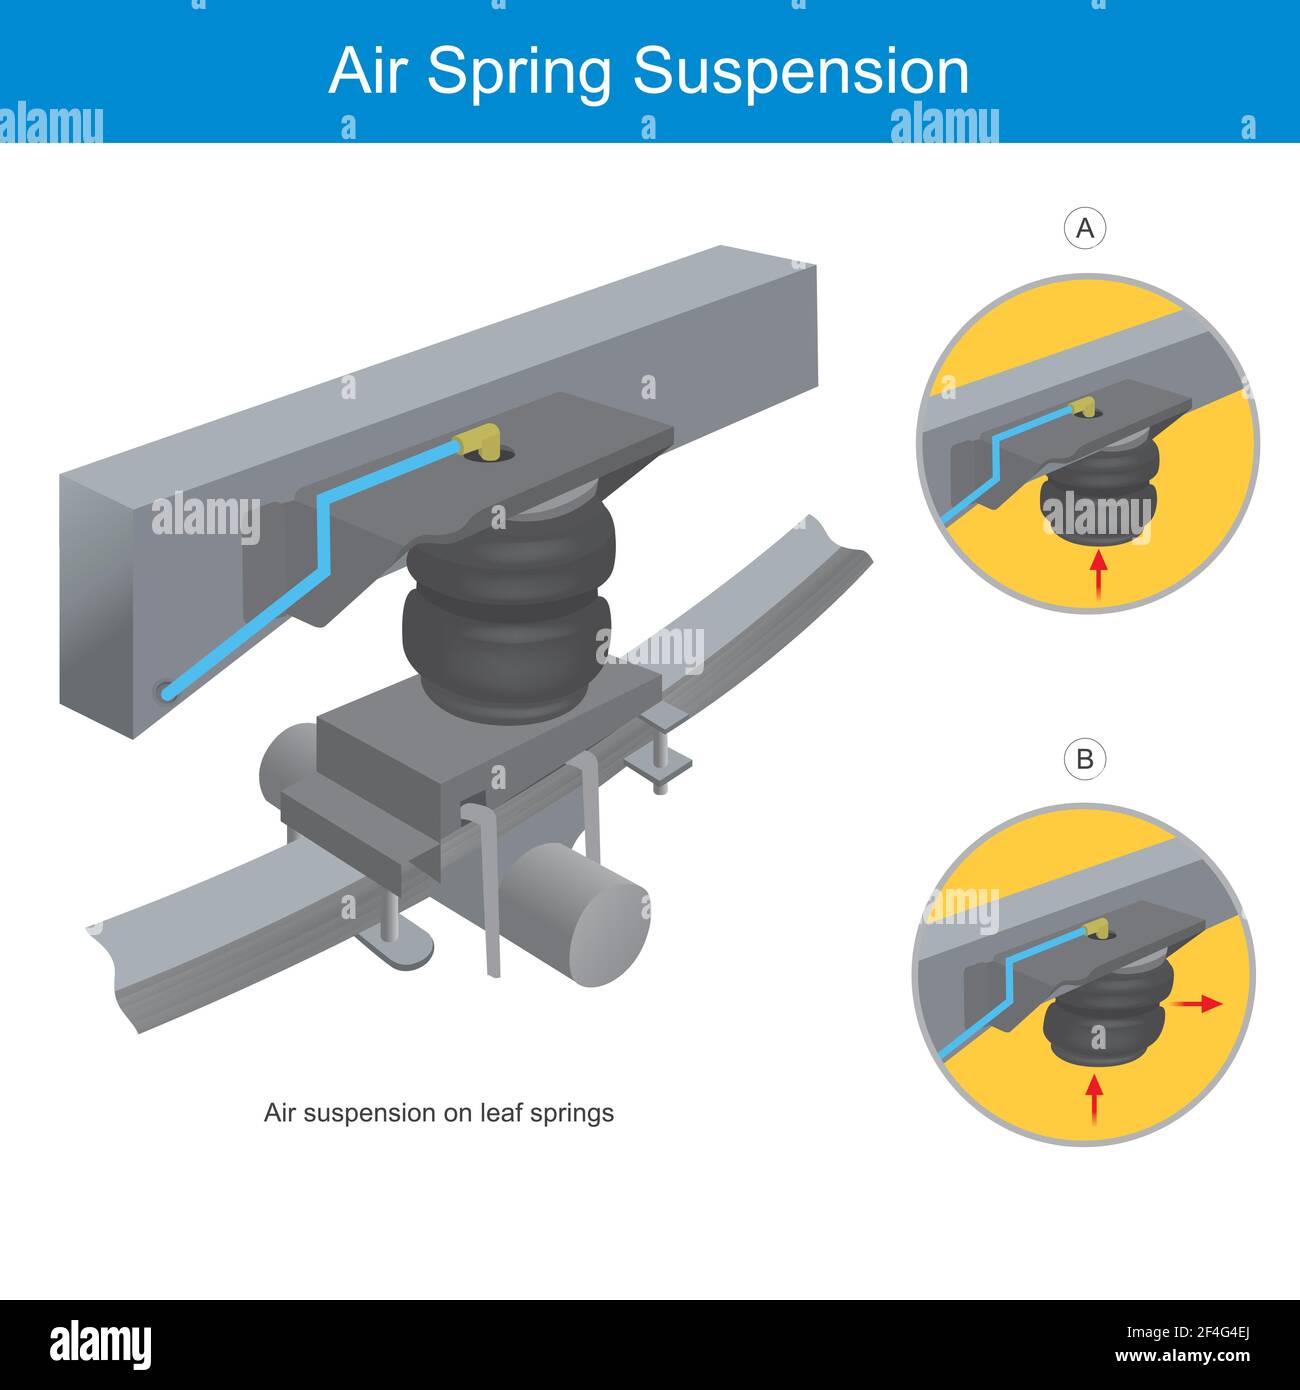 Air Spring Suspension. Illustration commercial for explain the suspension leaf spring in car, when used in conjunction with air bag spring suspension. Stock Vector